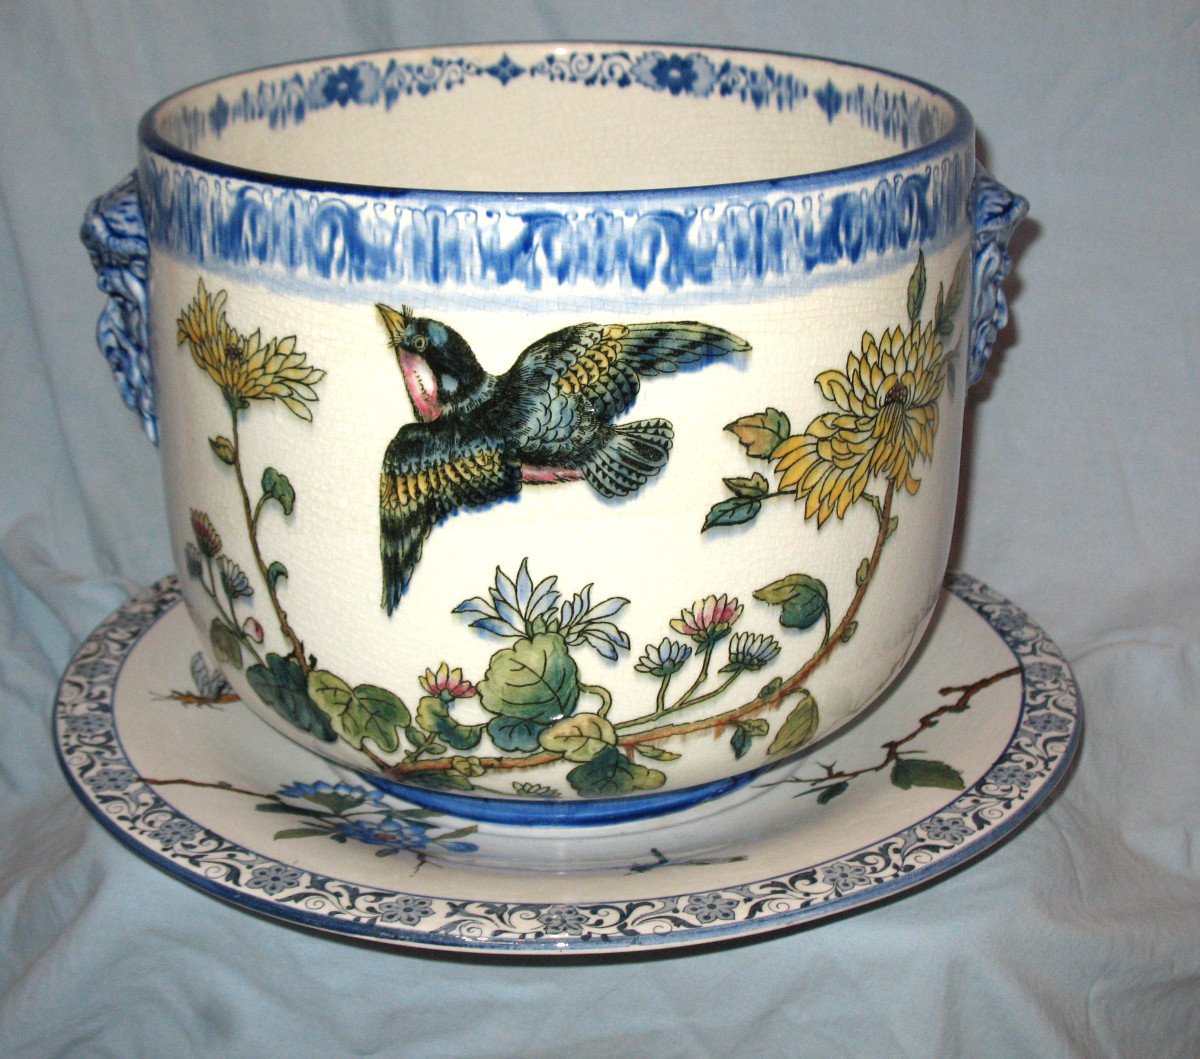 Large Cache Pot And Its Frame In Gien Earthenware Japanese Decor With A Bird, 19th Century